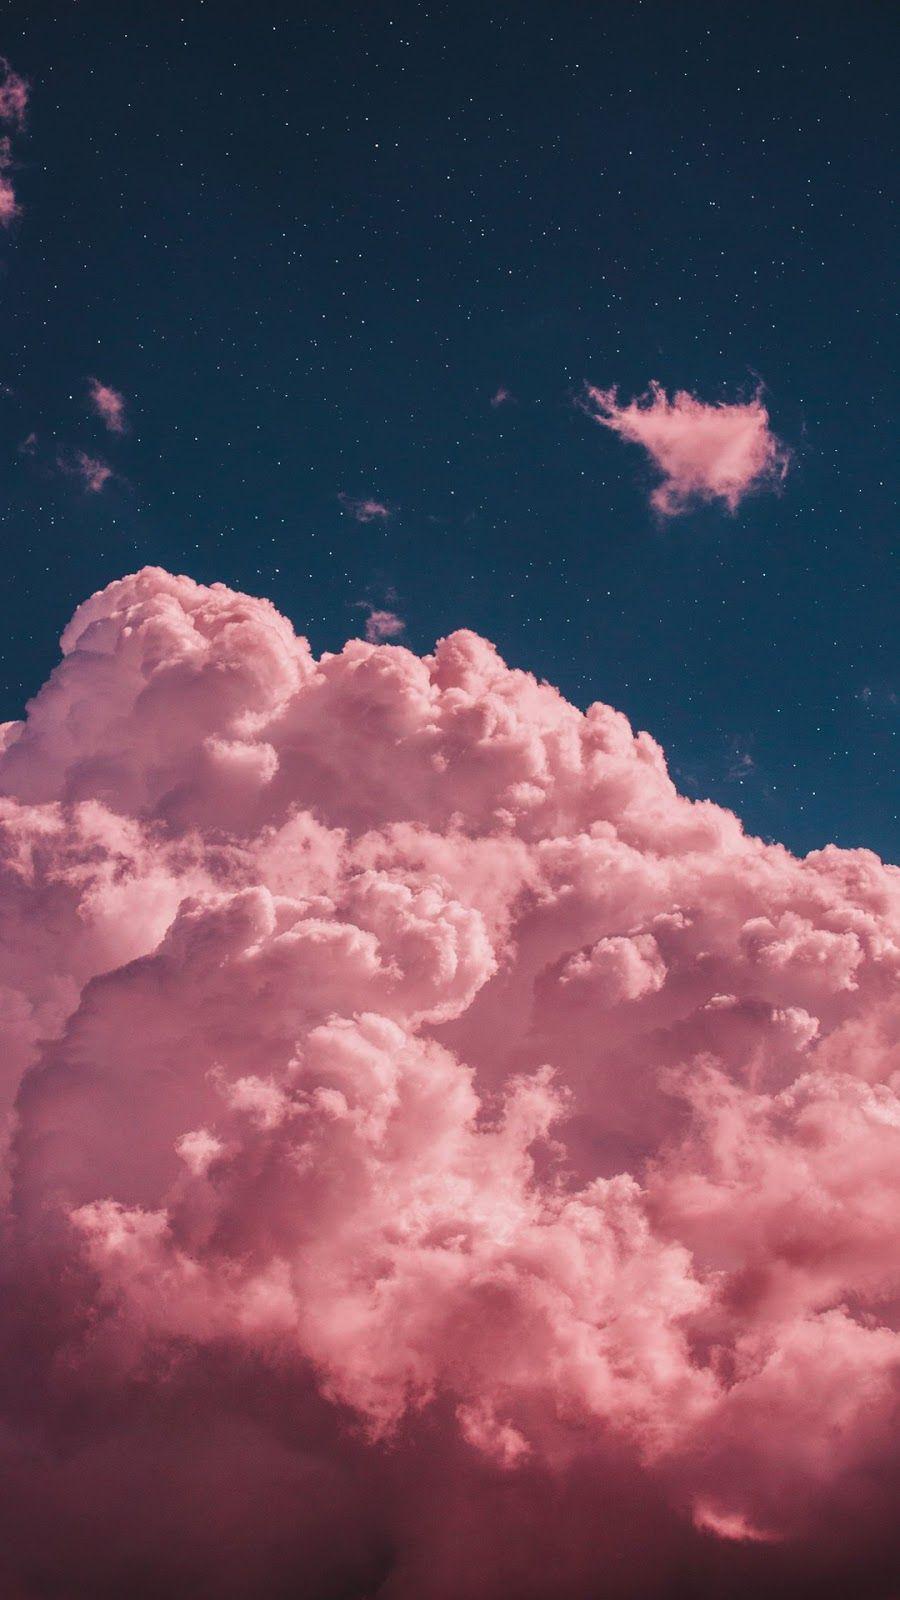 Aesthetic Pink Cloud Wallpaper Free Aesthetic Pink Cloud Background